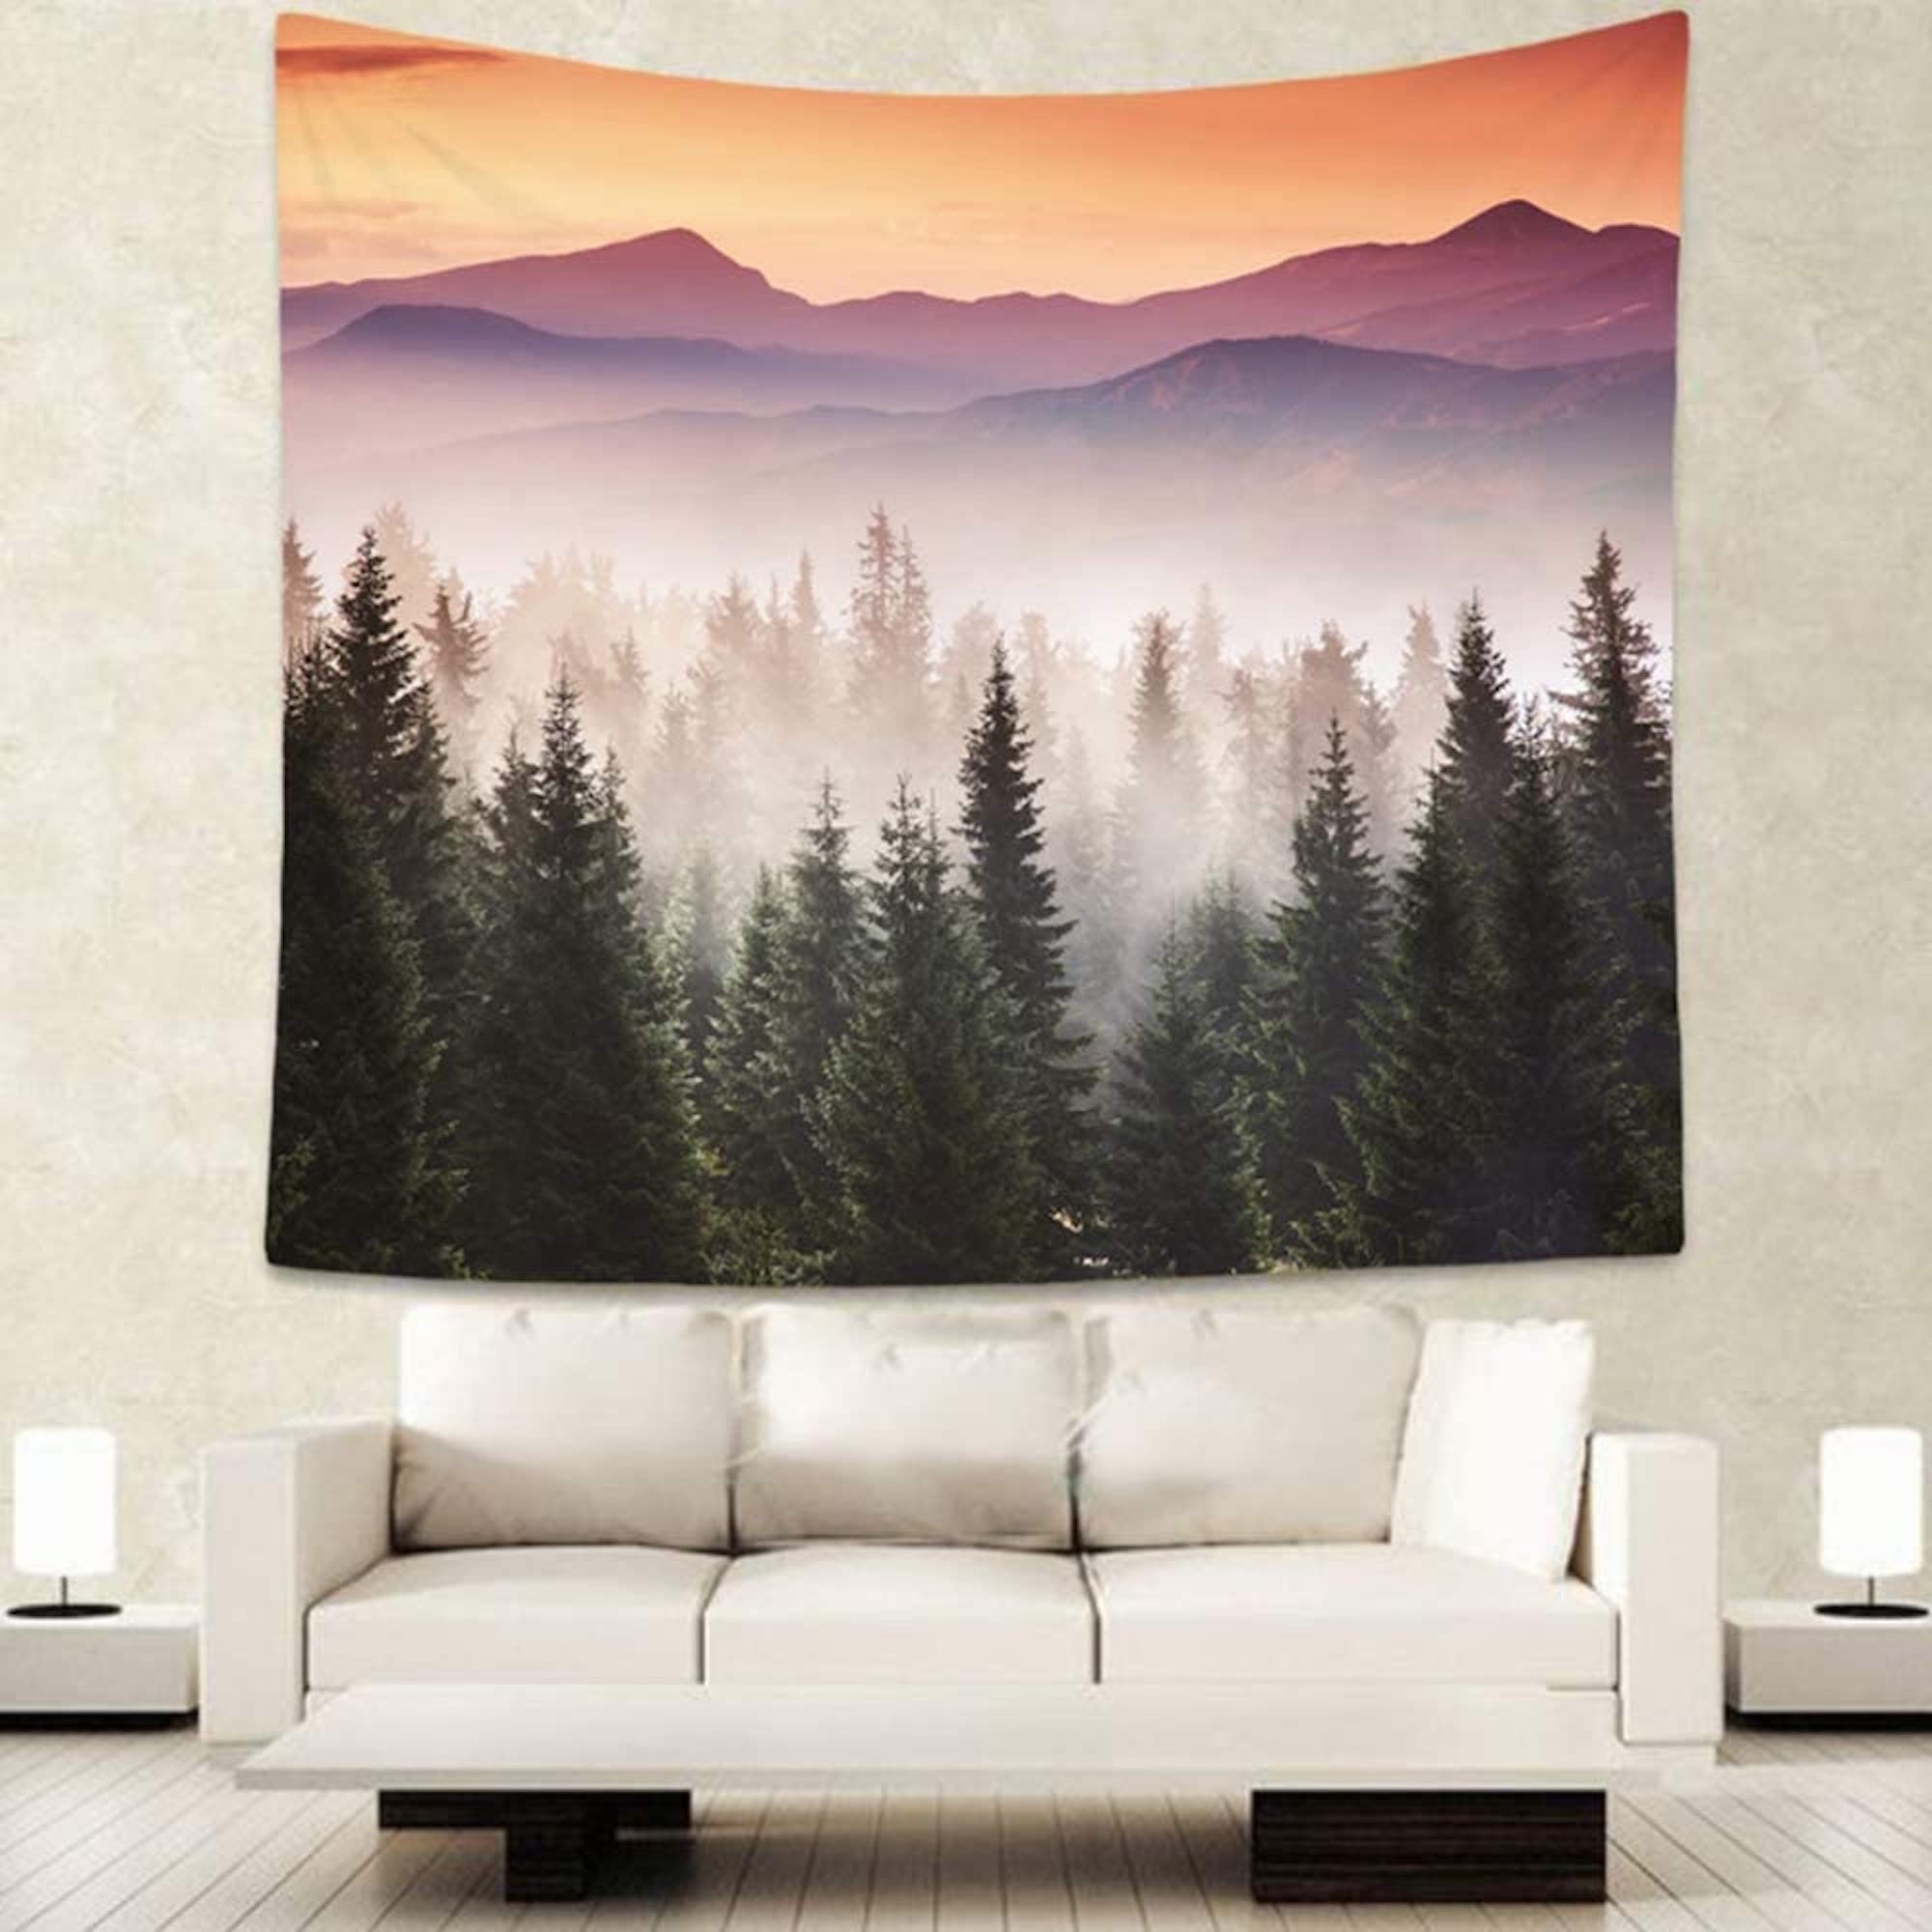 Fog Mountain Tapestry Art Wall Hanging Sofa Table Bed Cover Home Decor 